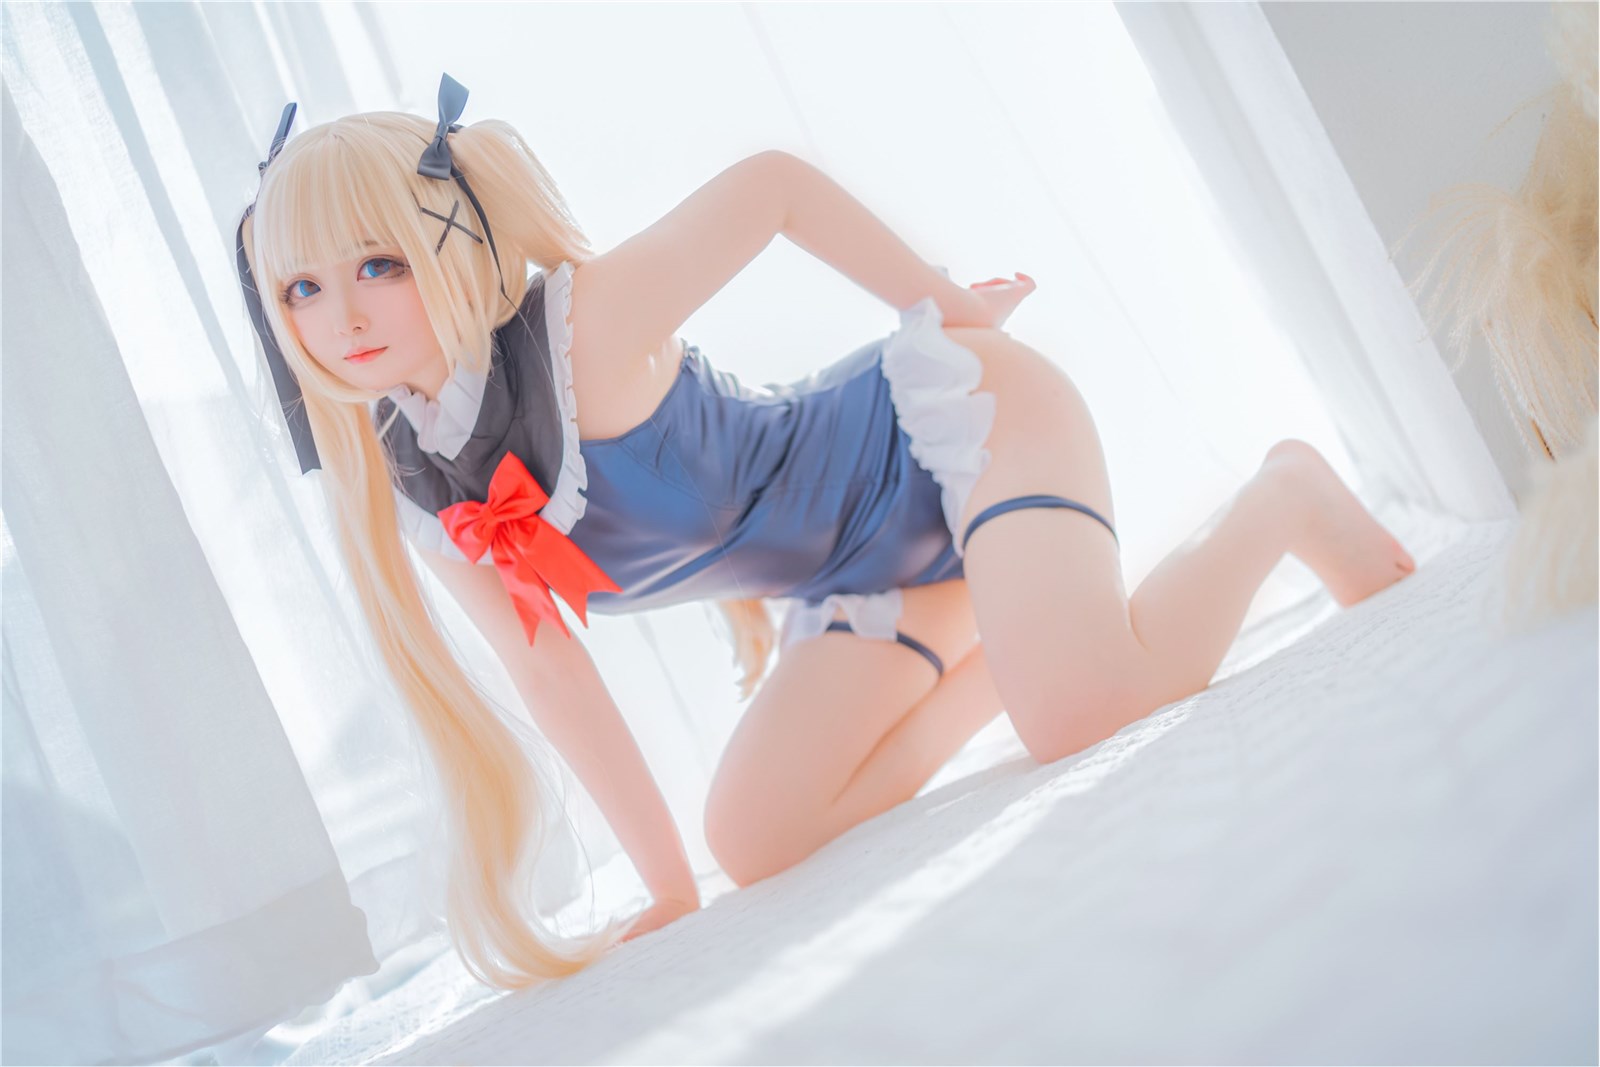 Cos sayako four years old this year - Mary Ross swimsuit コ ス プ レ photo(5)